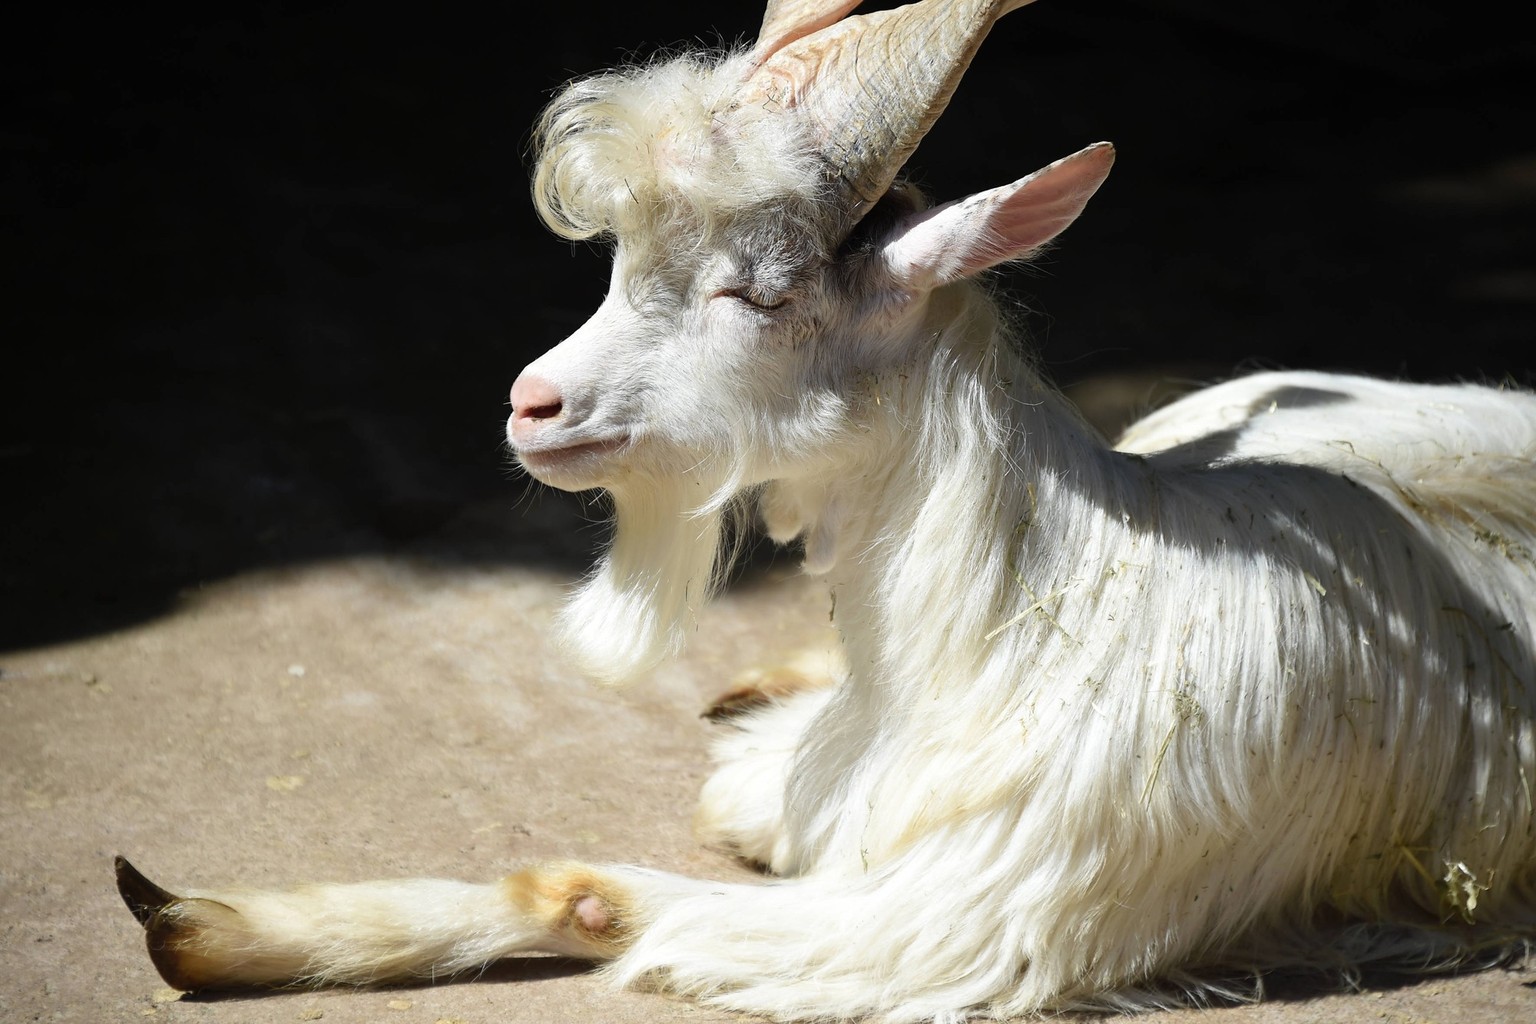 Young goat girgentana. The bioparc of Rome, 17 hectares, 1000 animals of 150 species including mammals, reptiles, birds and amphibians in a botanical setting with hundreds of trees. Rome Italy, July 0 ...